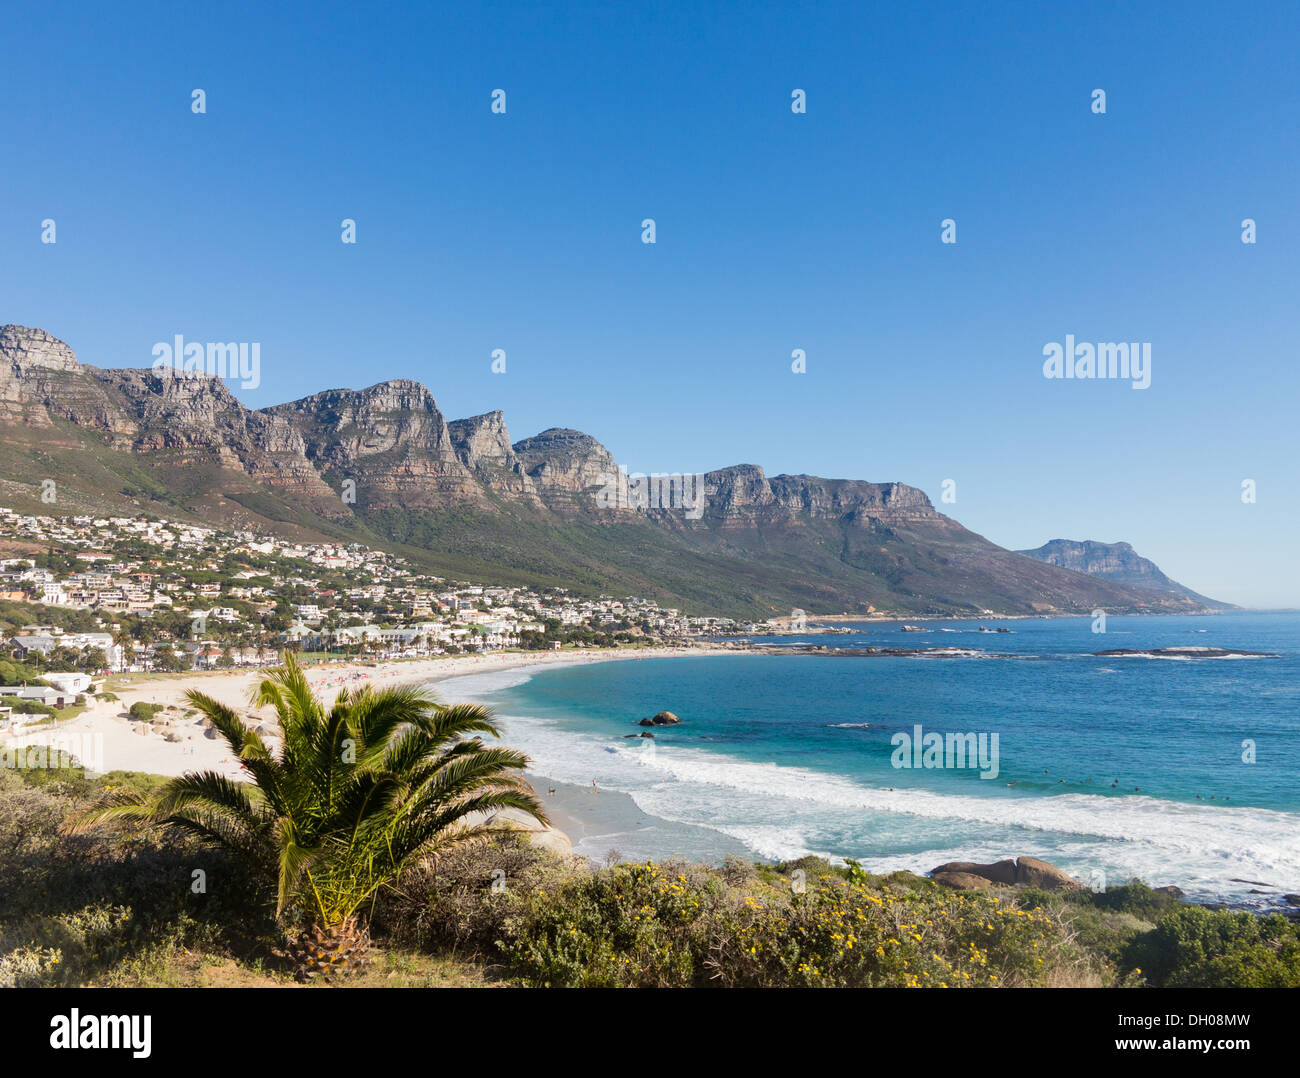 Beach at Camps Bay Cape Town with Table Mountain in background, South Africa coast Stock Photo